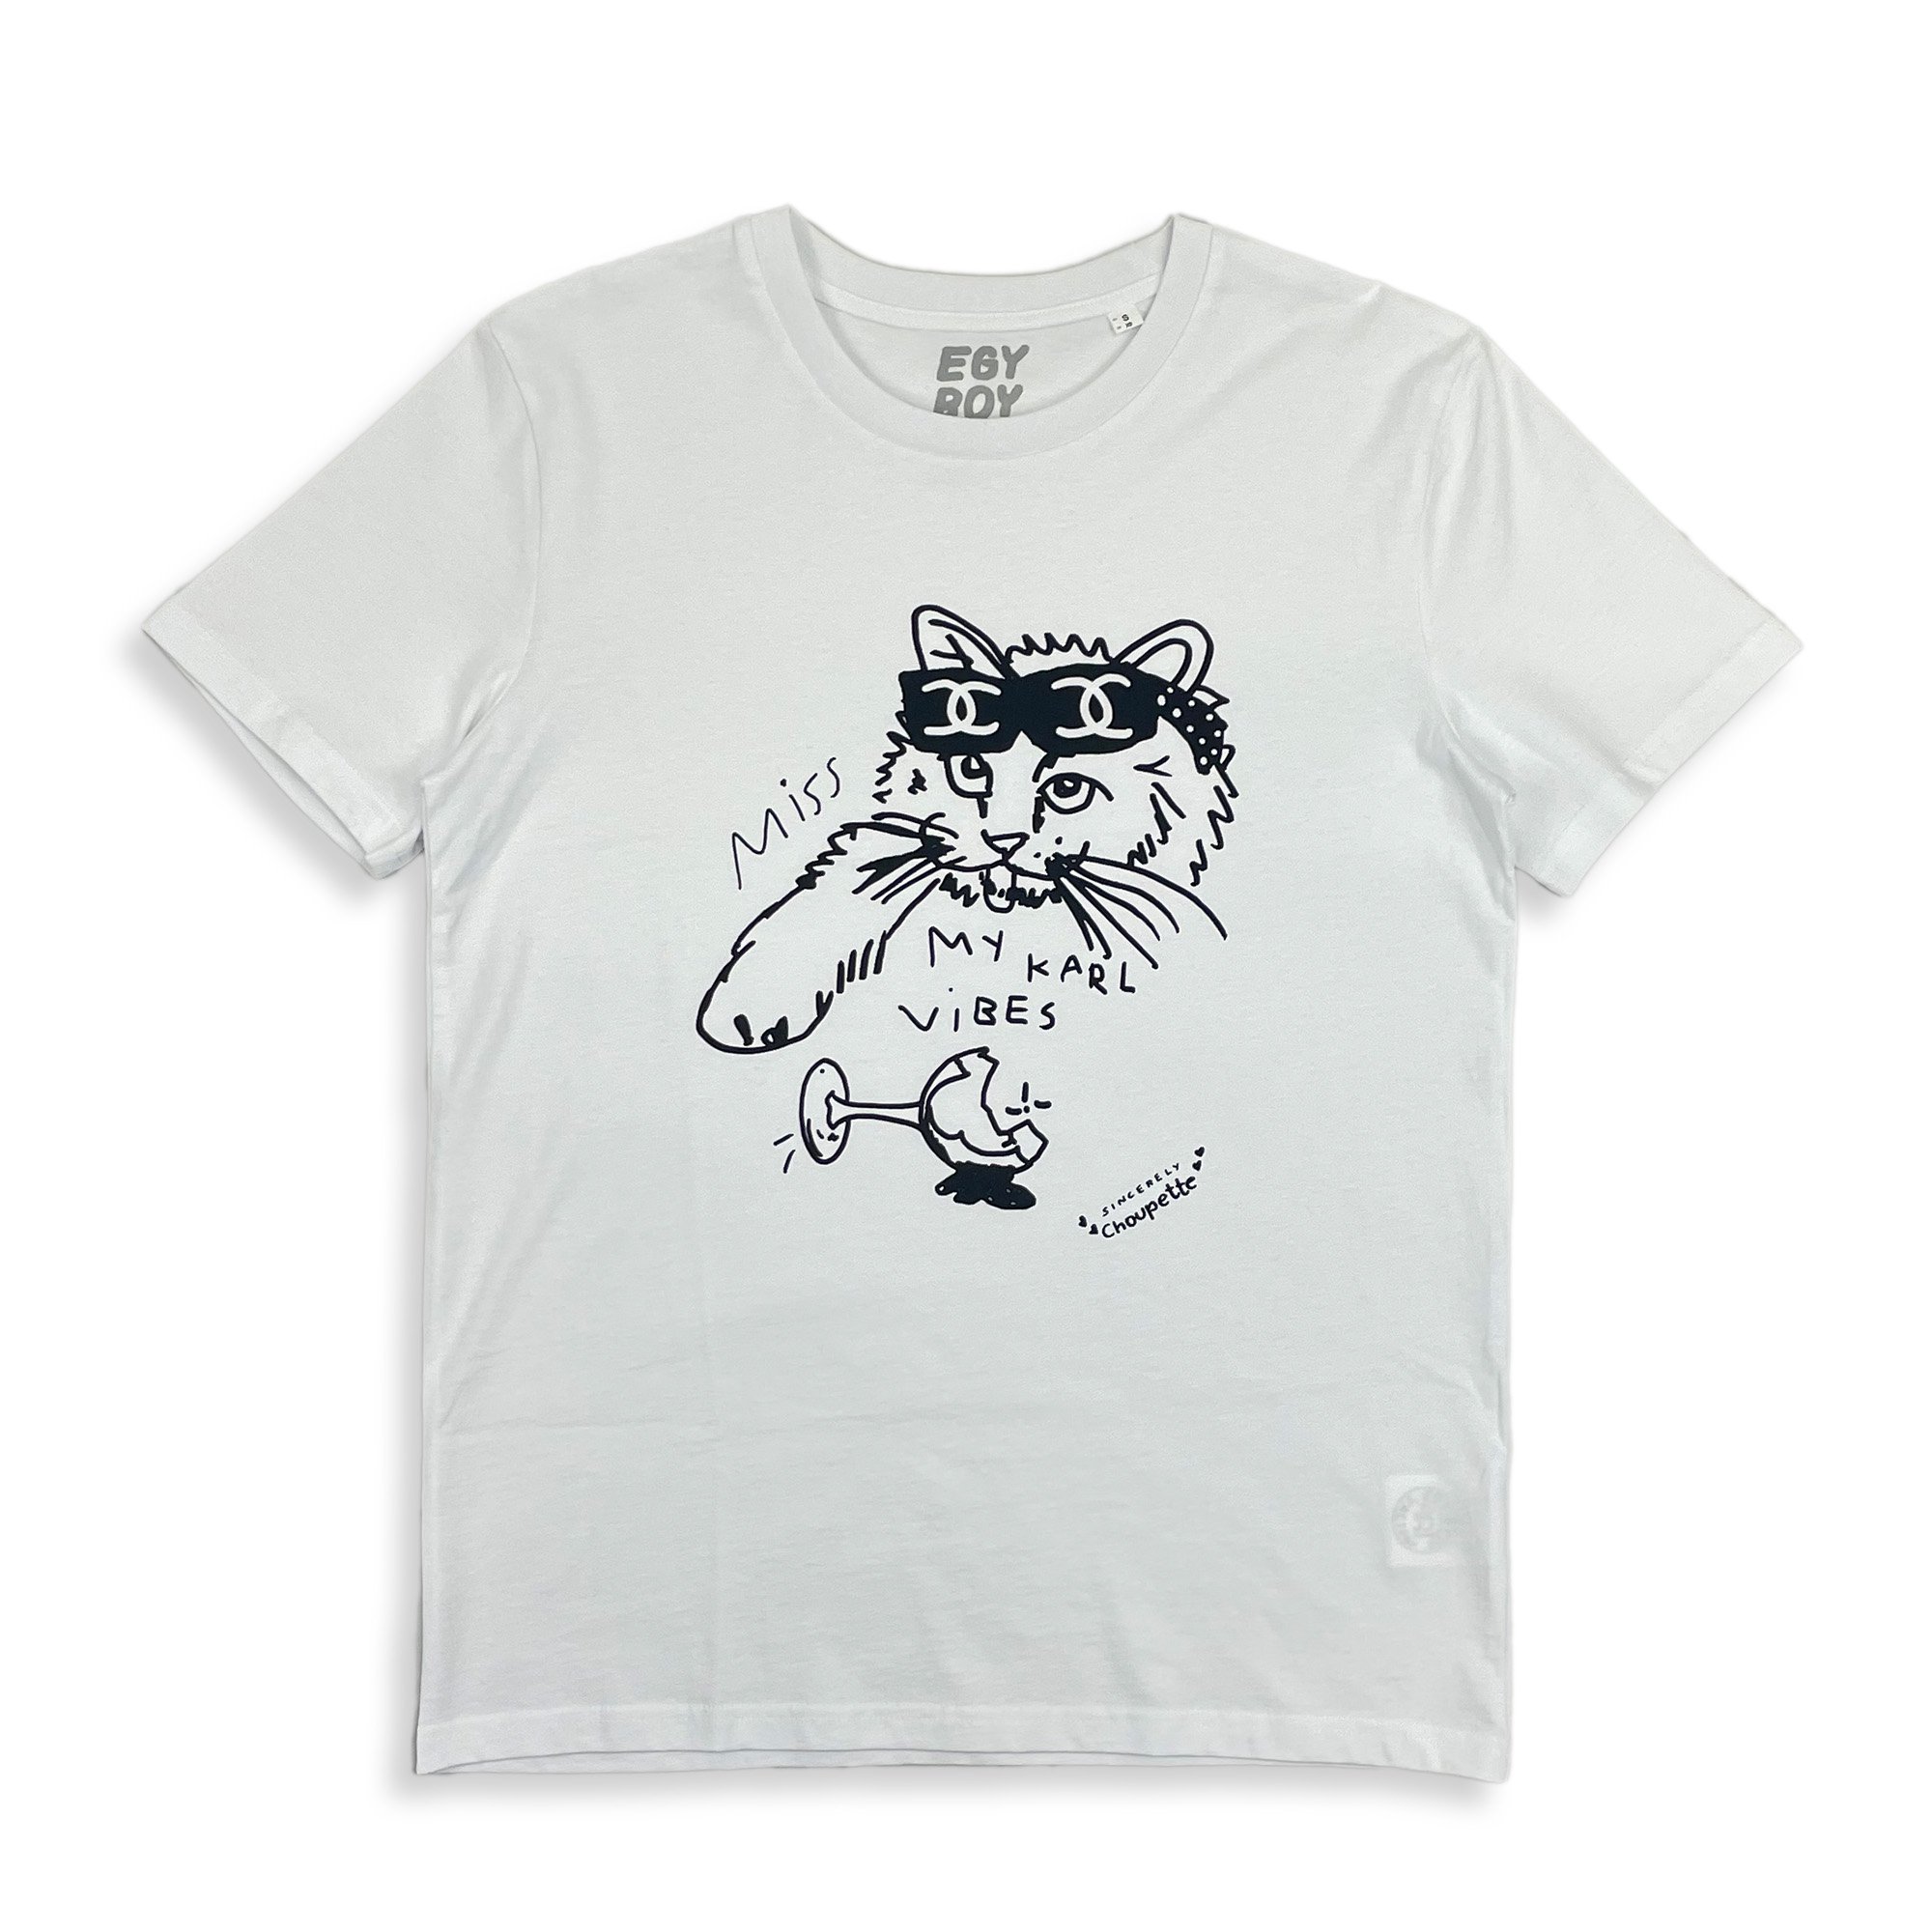 <img class='new_mark_img1' src='https://img.shop-pro.jp/img/new/icons7.gif' style='border:none;display:inline;margin:0px;padding:0px;width:auto;' />EGYBOY T-SHIRT